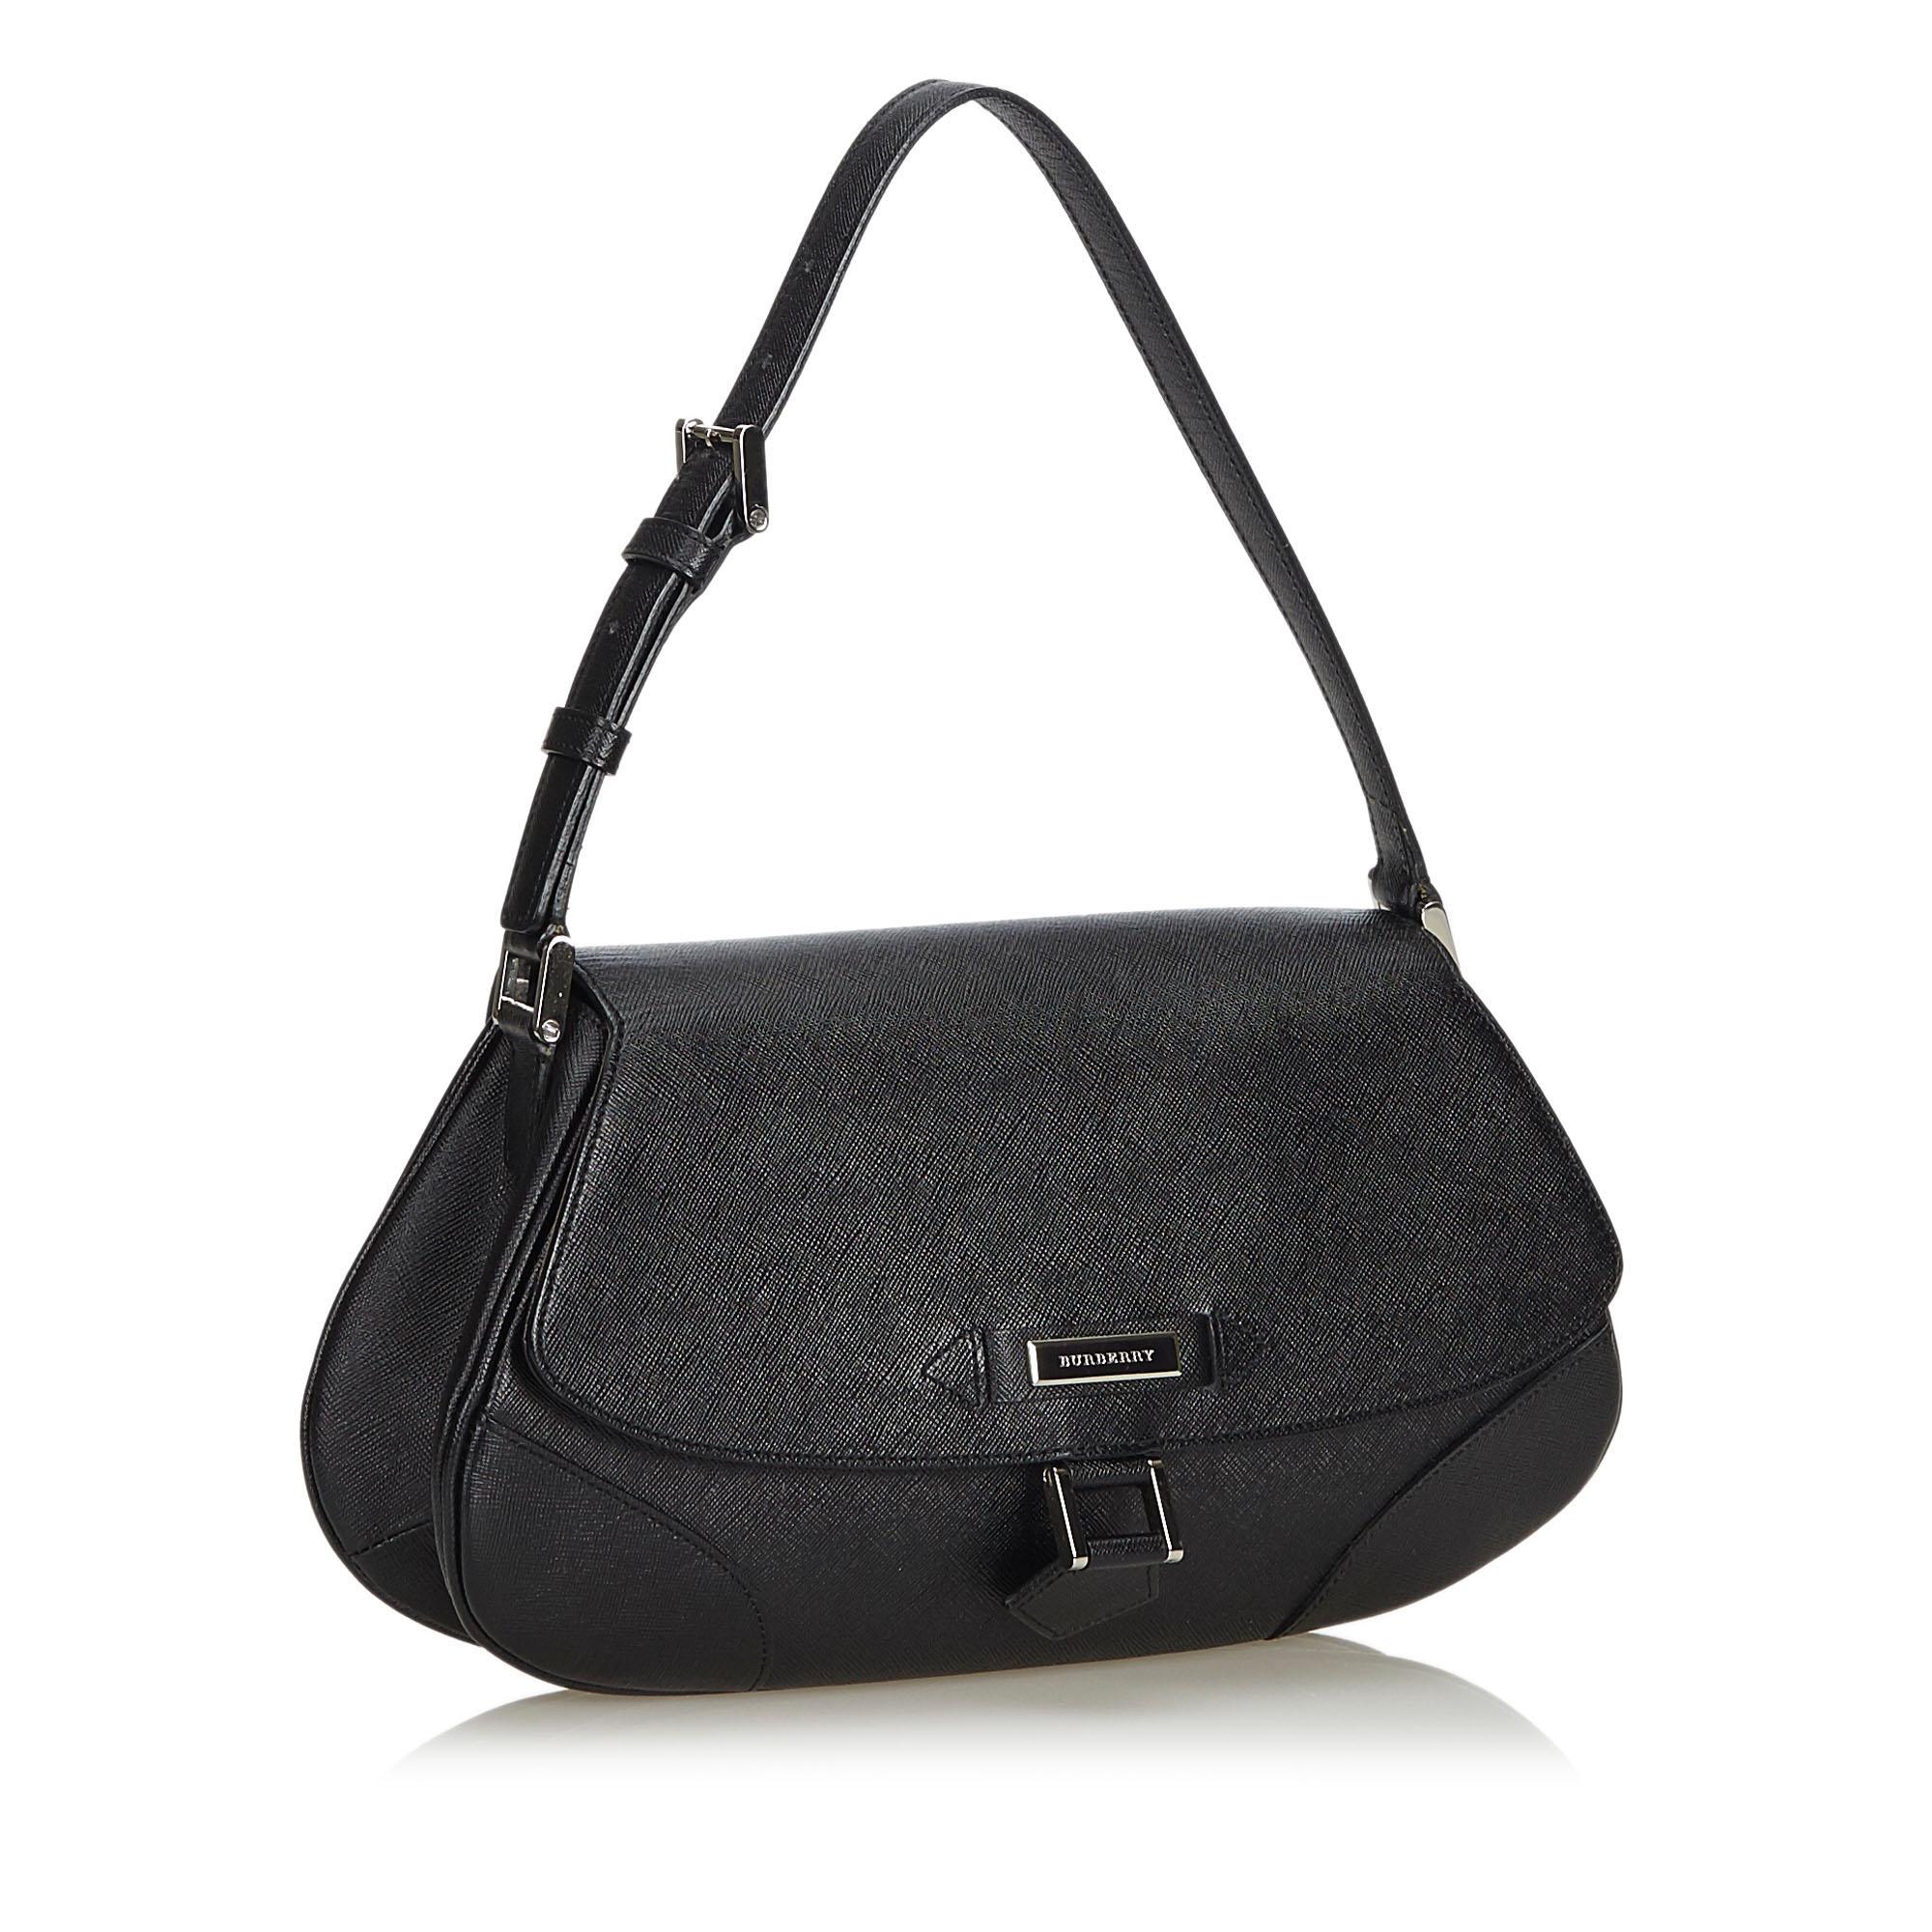 This handbag features a leather body, a flat leather strap, a top flap with a magnetic closure, and interior zip and slip pockets. It carries as A condition rating.

Inclusions: 
This item does not come with inclusions.

Dimensions:
Length: 18.00